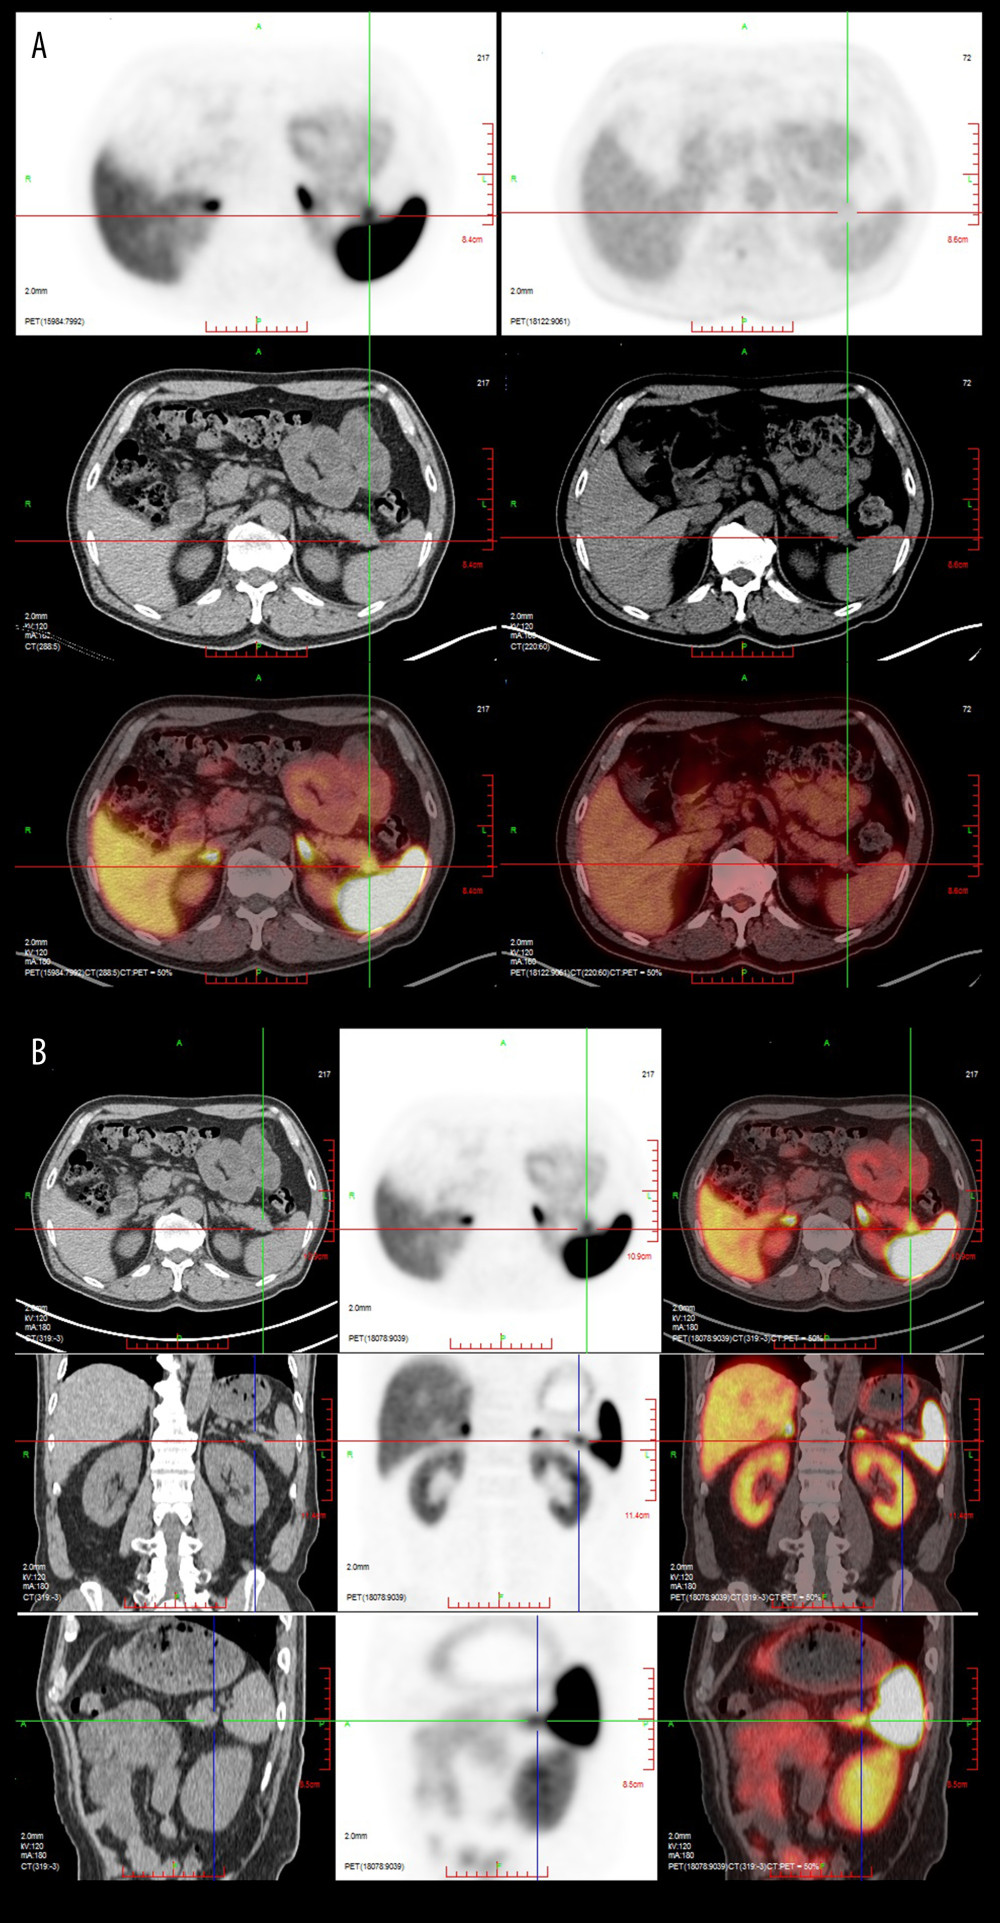 (A) Fluorodeoxyglucose positron emission tomography-computed tomography (PET-CT) results revealed that there was a slightly low-density shadow lesion in the tail of the pancreas and no obvious metabolism, and benign or low-grade malignant lesions were considered. (B) Ga-68 dotatate PET-CT results demonstrated that the space-occupying lesions in the pancreatic tail were likely neuroendocrine tumors.